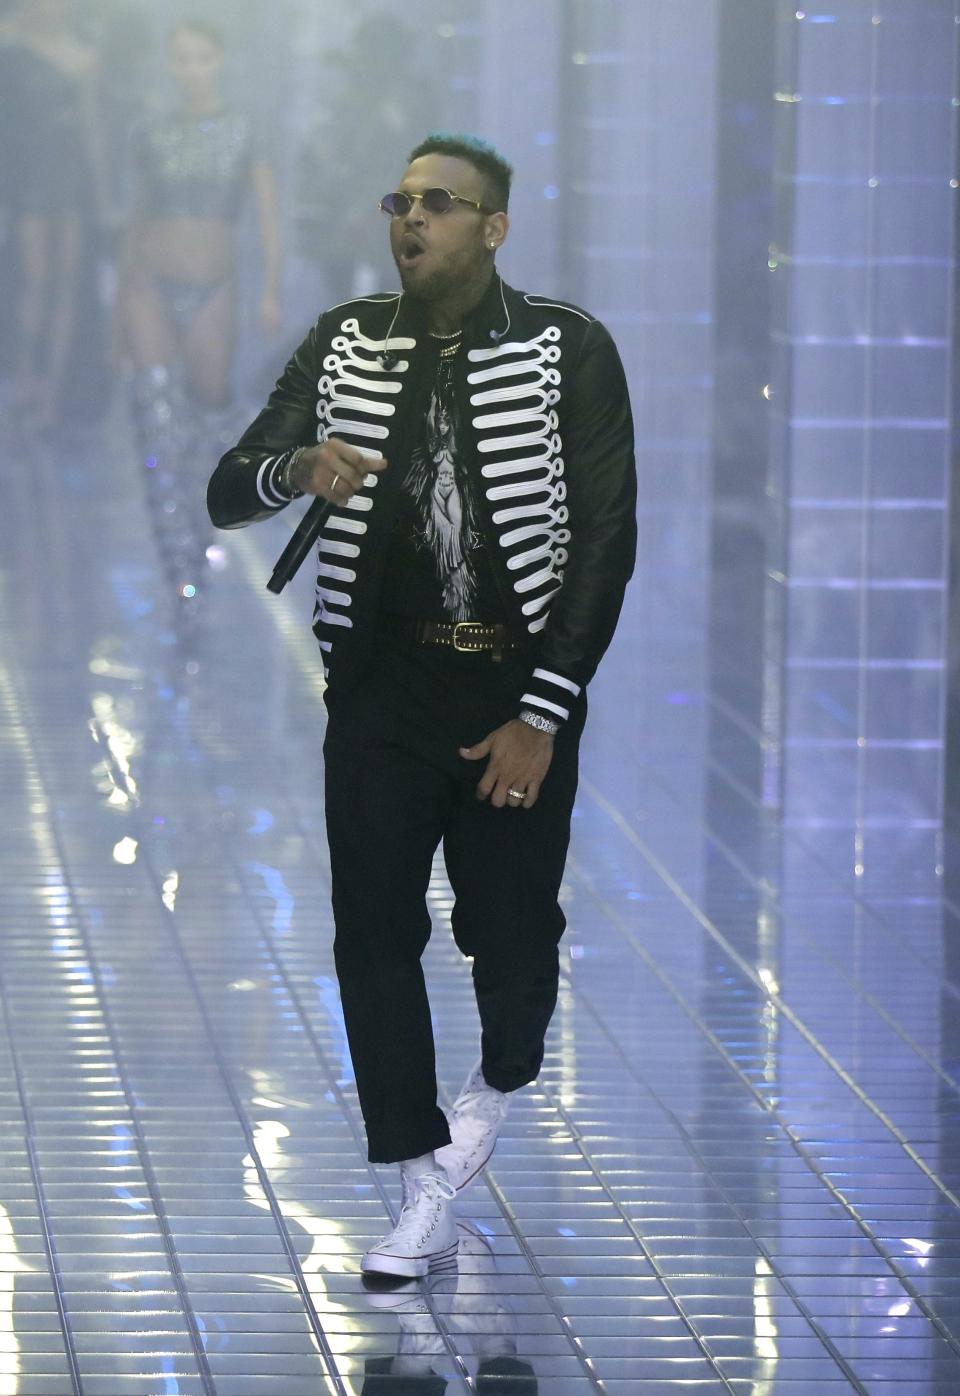 FILE - In this Sept. 21, 2018 file photo, US rapper Chris Brown performs during Philipp Plein's women's 2019 Spring-Summer collection, unveiled during the Fashion Week in Milan, Italy. The lawyer for a woman who filed a rape complaint in Paris against Brown says the American rap artist "has thumbed his nose at and shown disrespect for the French legal system" after he did not attend a formal confrontation with the alleged victim in Paris on Tuesday, May 28, 2019. (AP Photo/Luca Bruno, files)